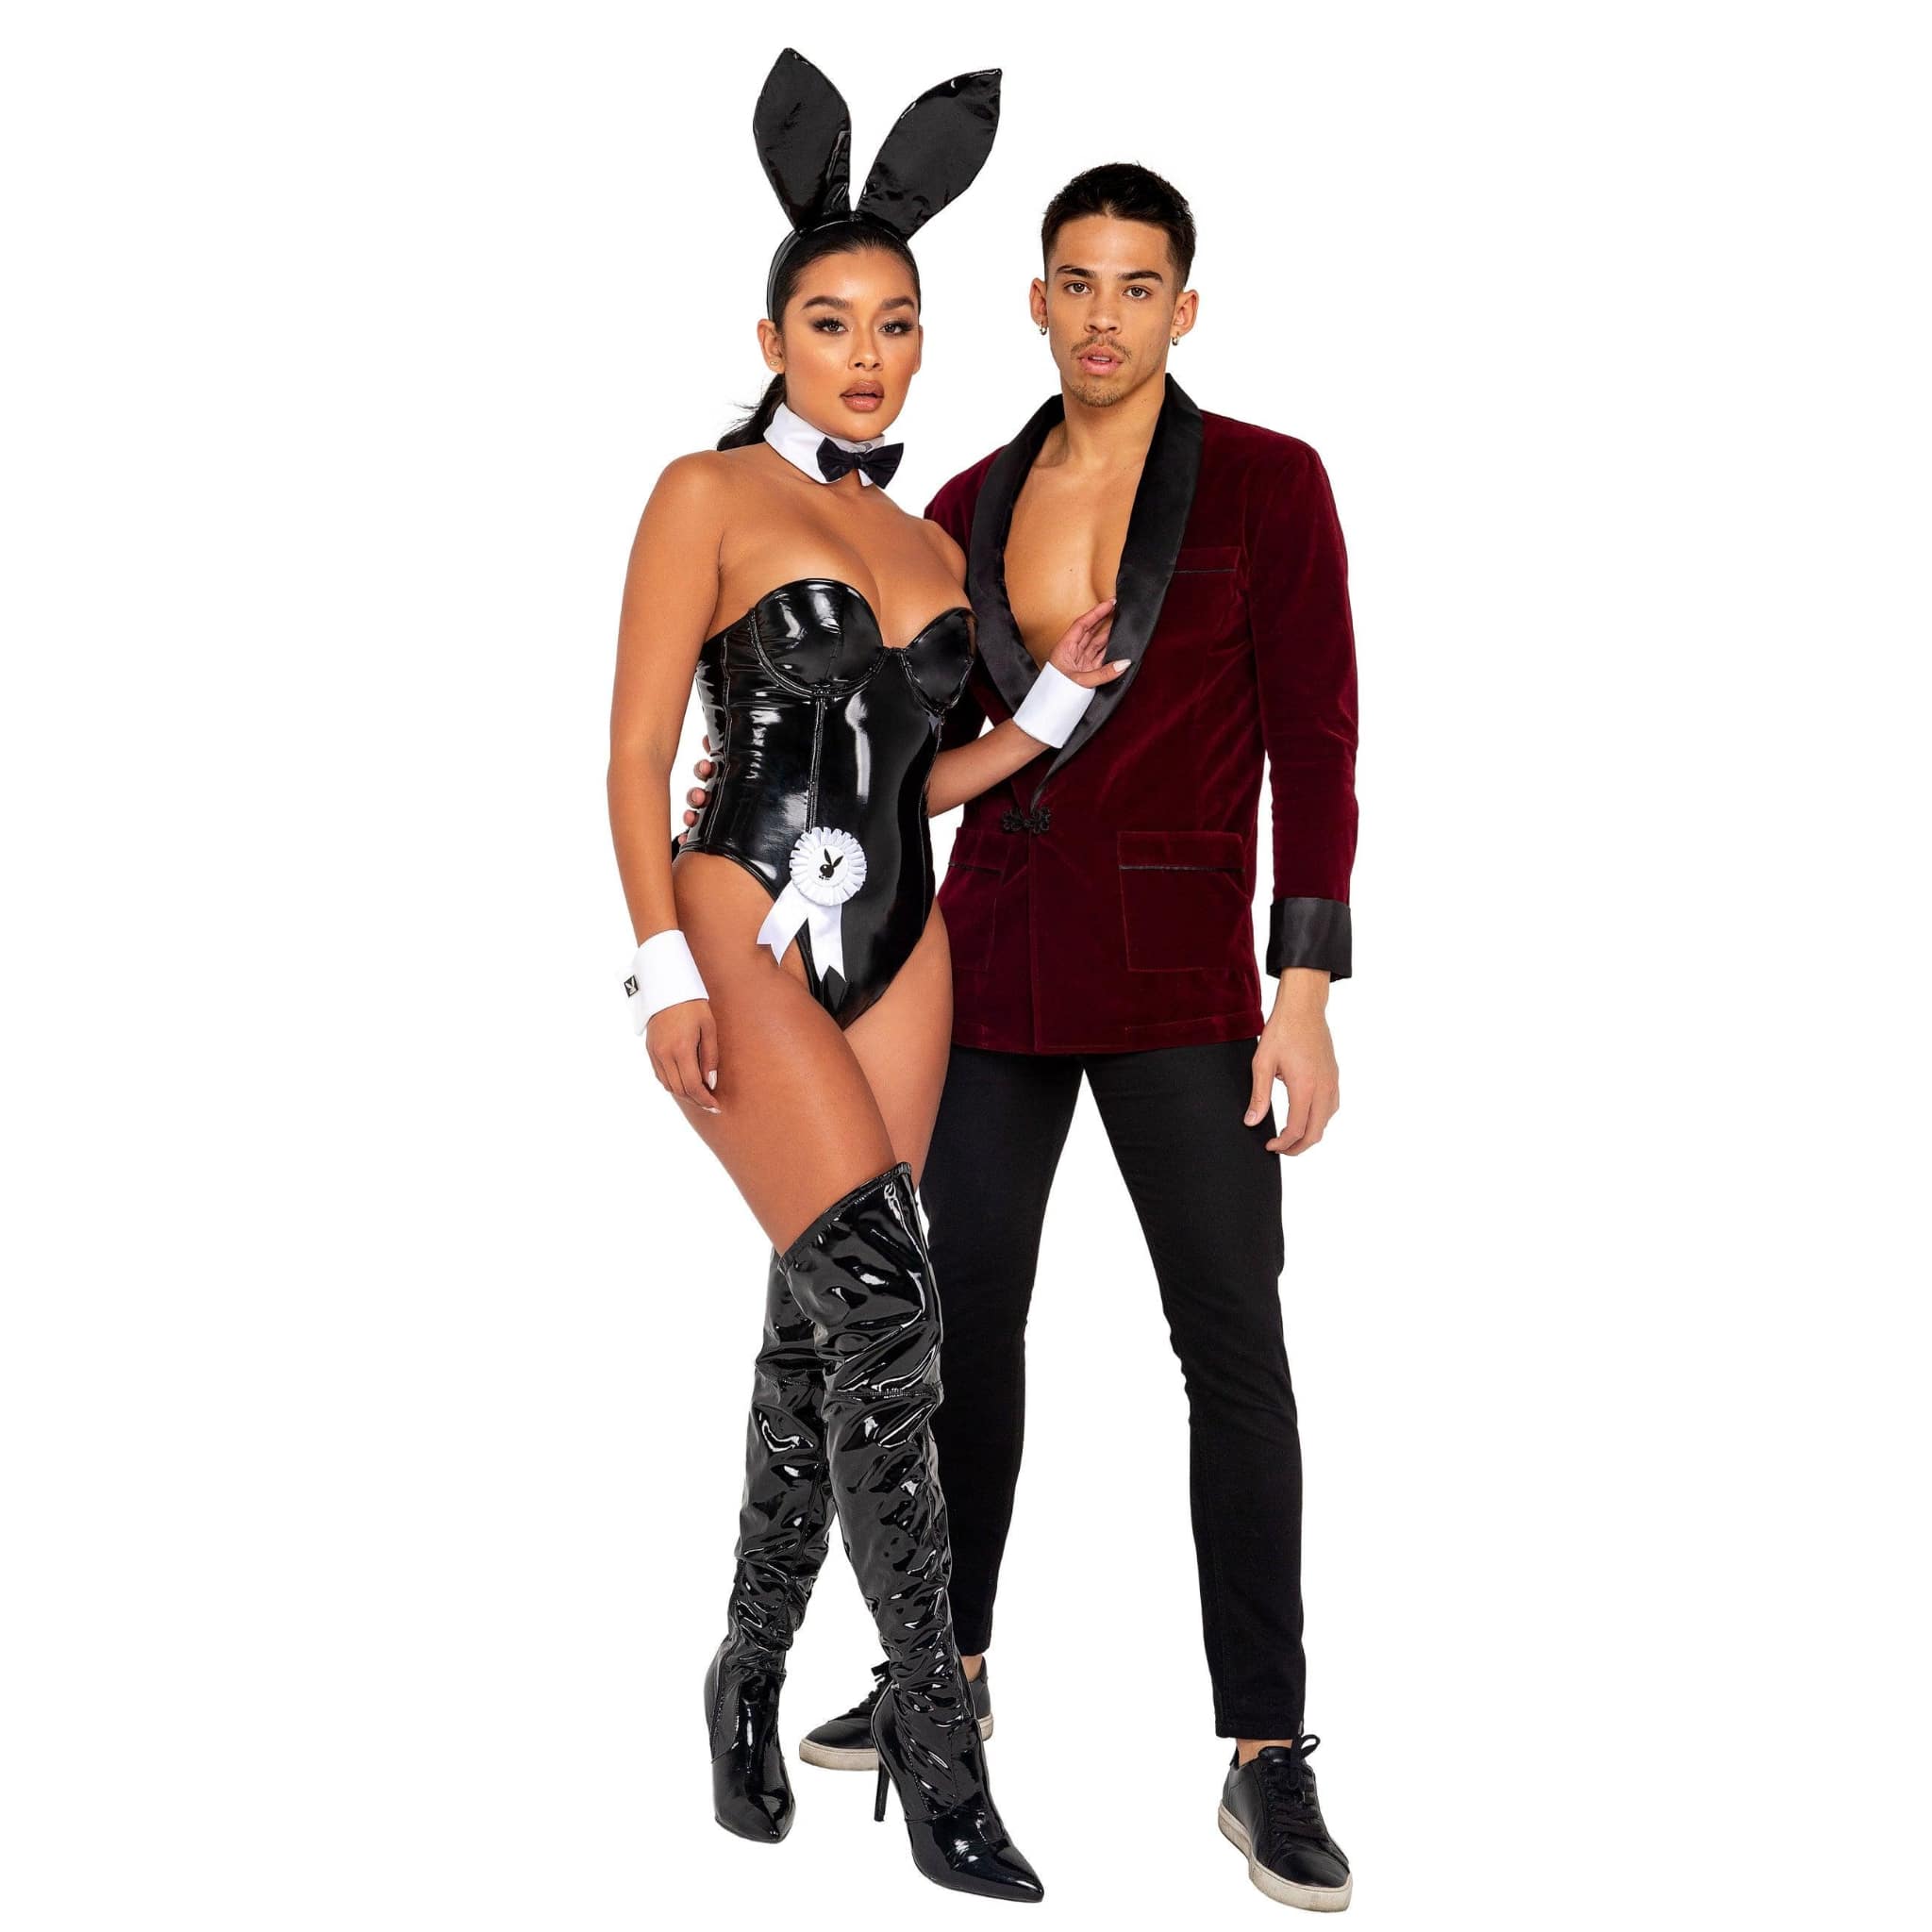 david loyer recommends Pics Of Playboy Bunny